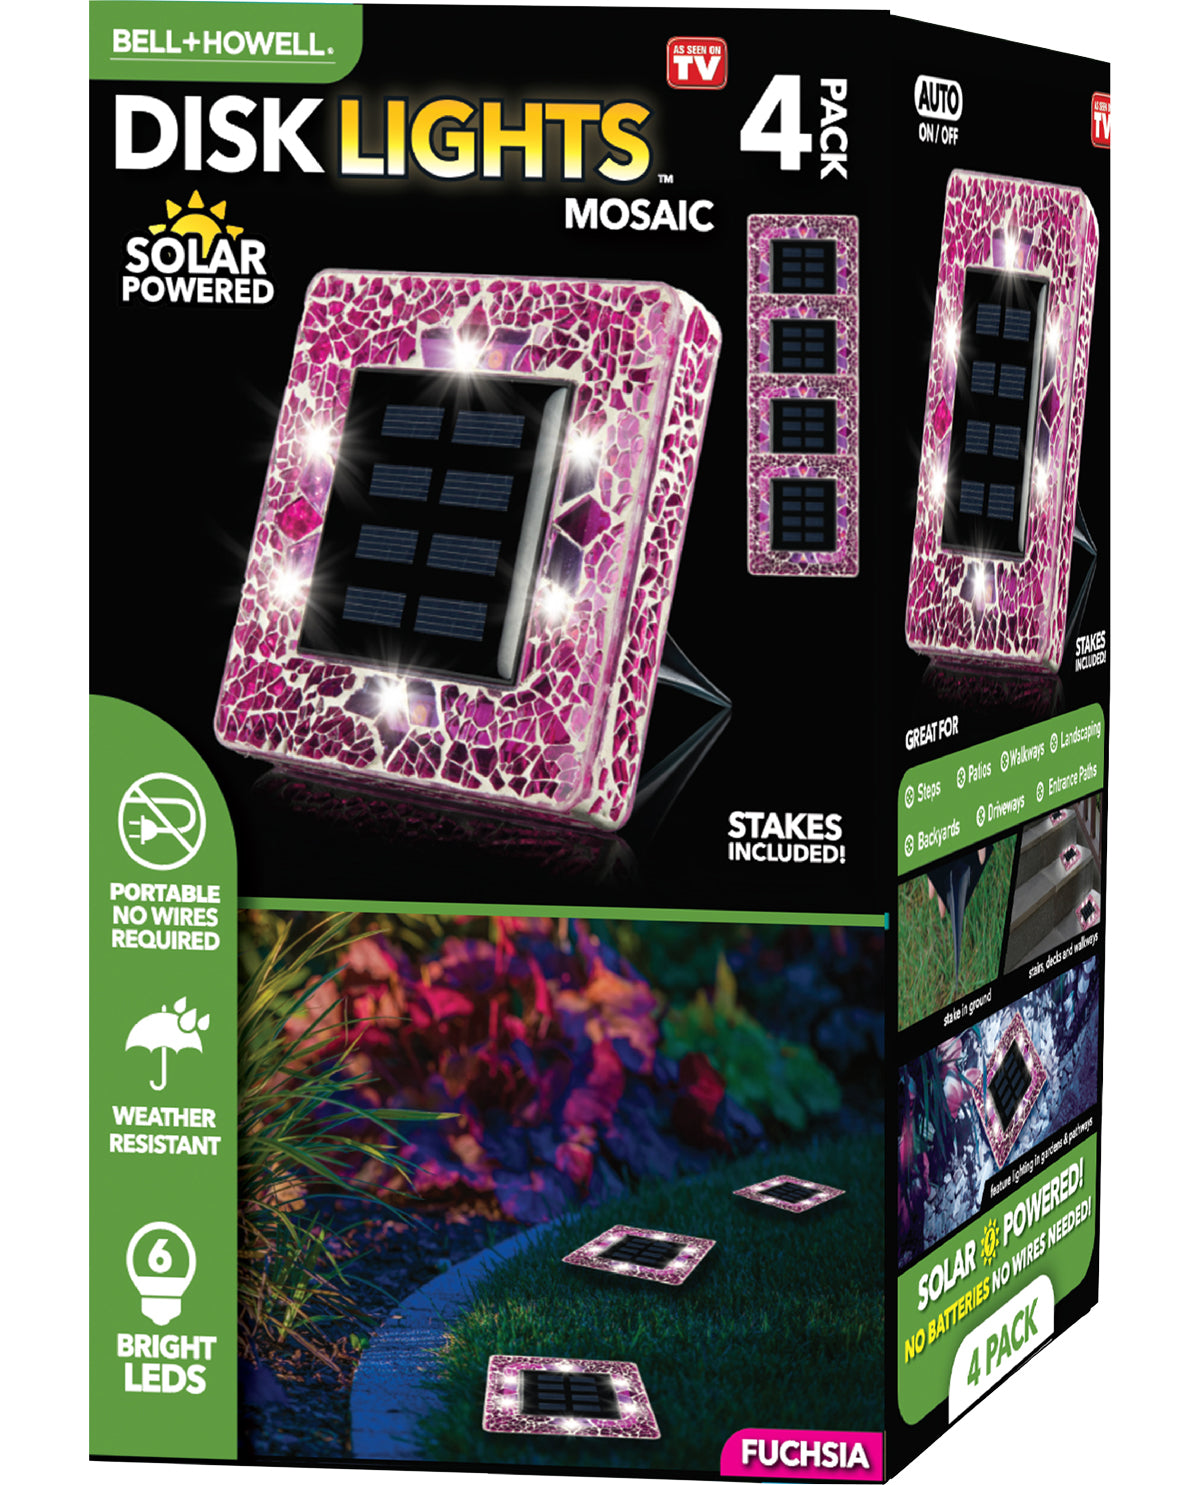 Bell+Howell Solar Powered Square Disk Lights with Fuchsia Mosaic Glass (4-Pack)